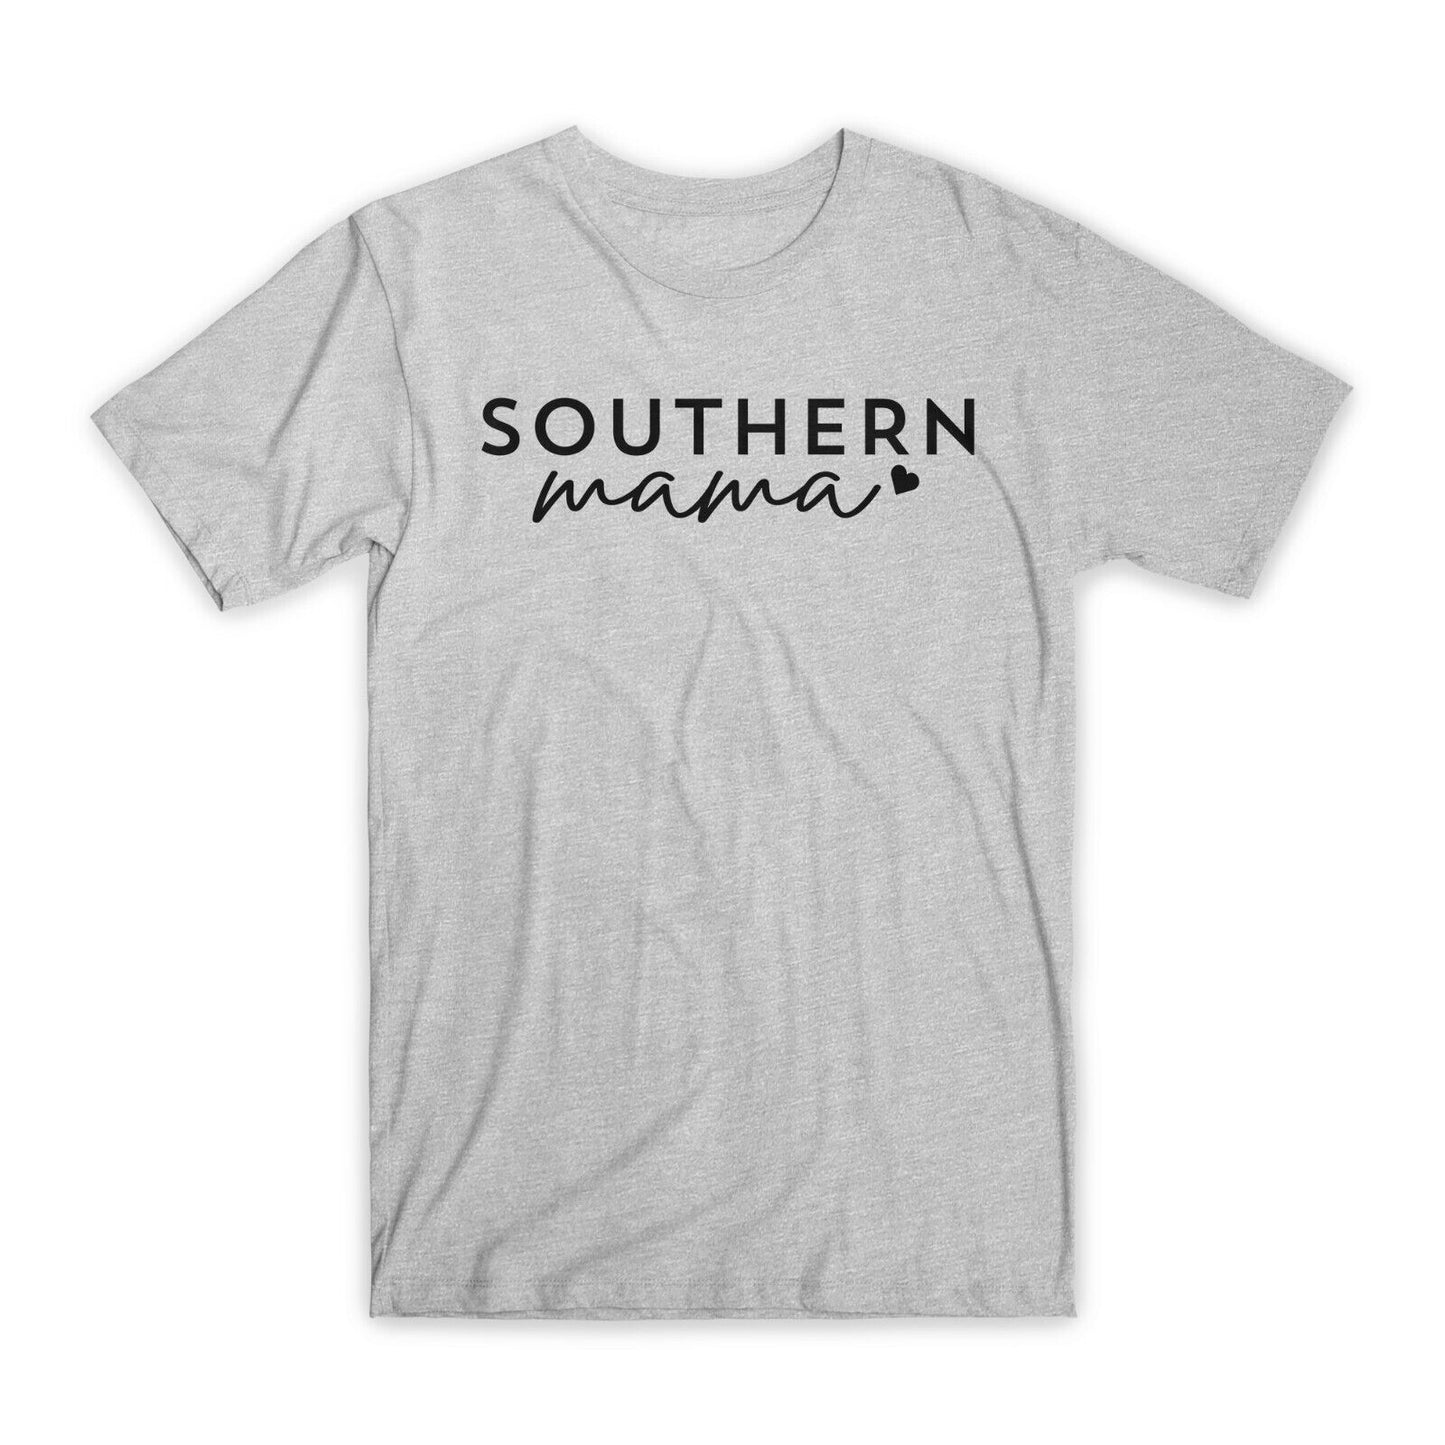 Southern Mama T-Shirt Premium Soft Cotton Crew Neck Funny Tees Novelty Gifts NEW